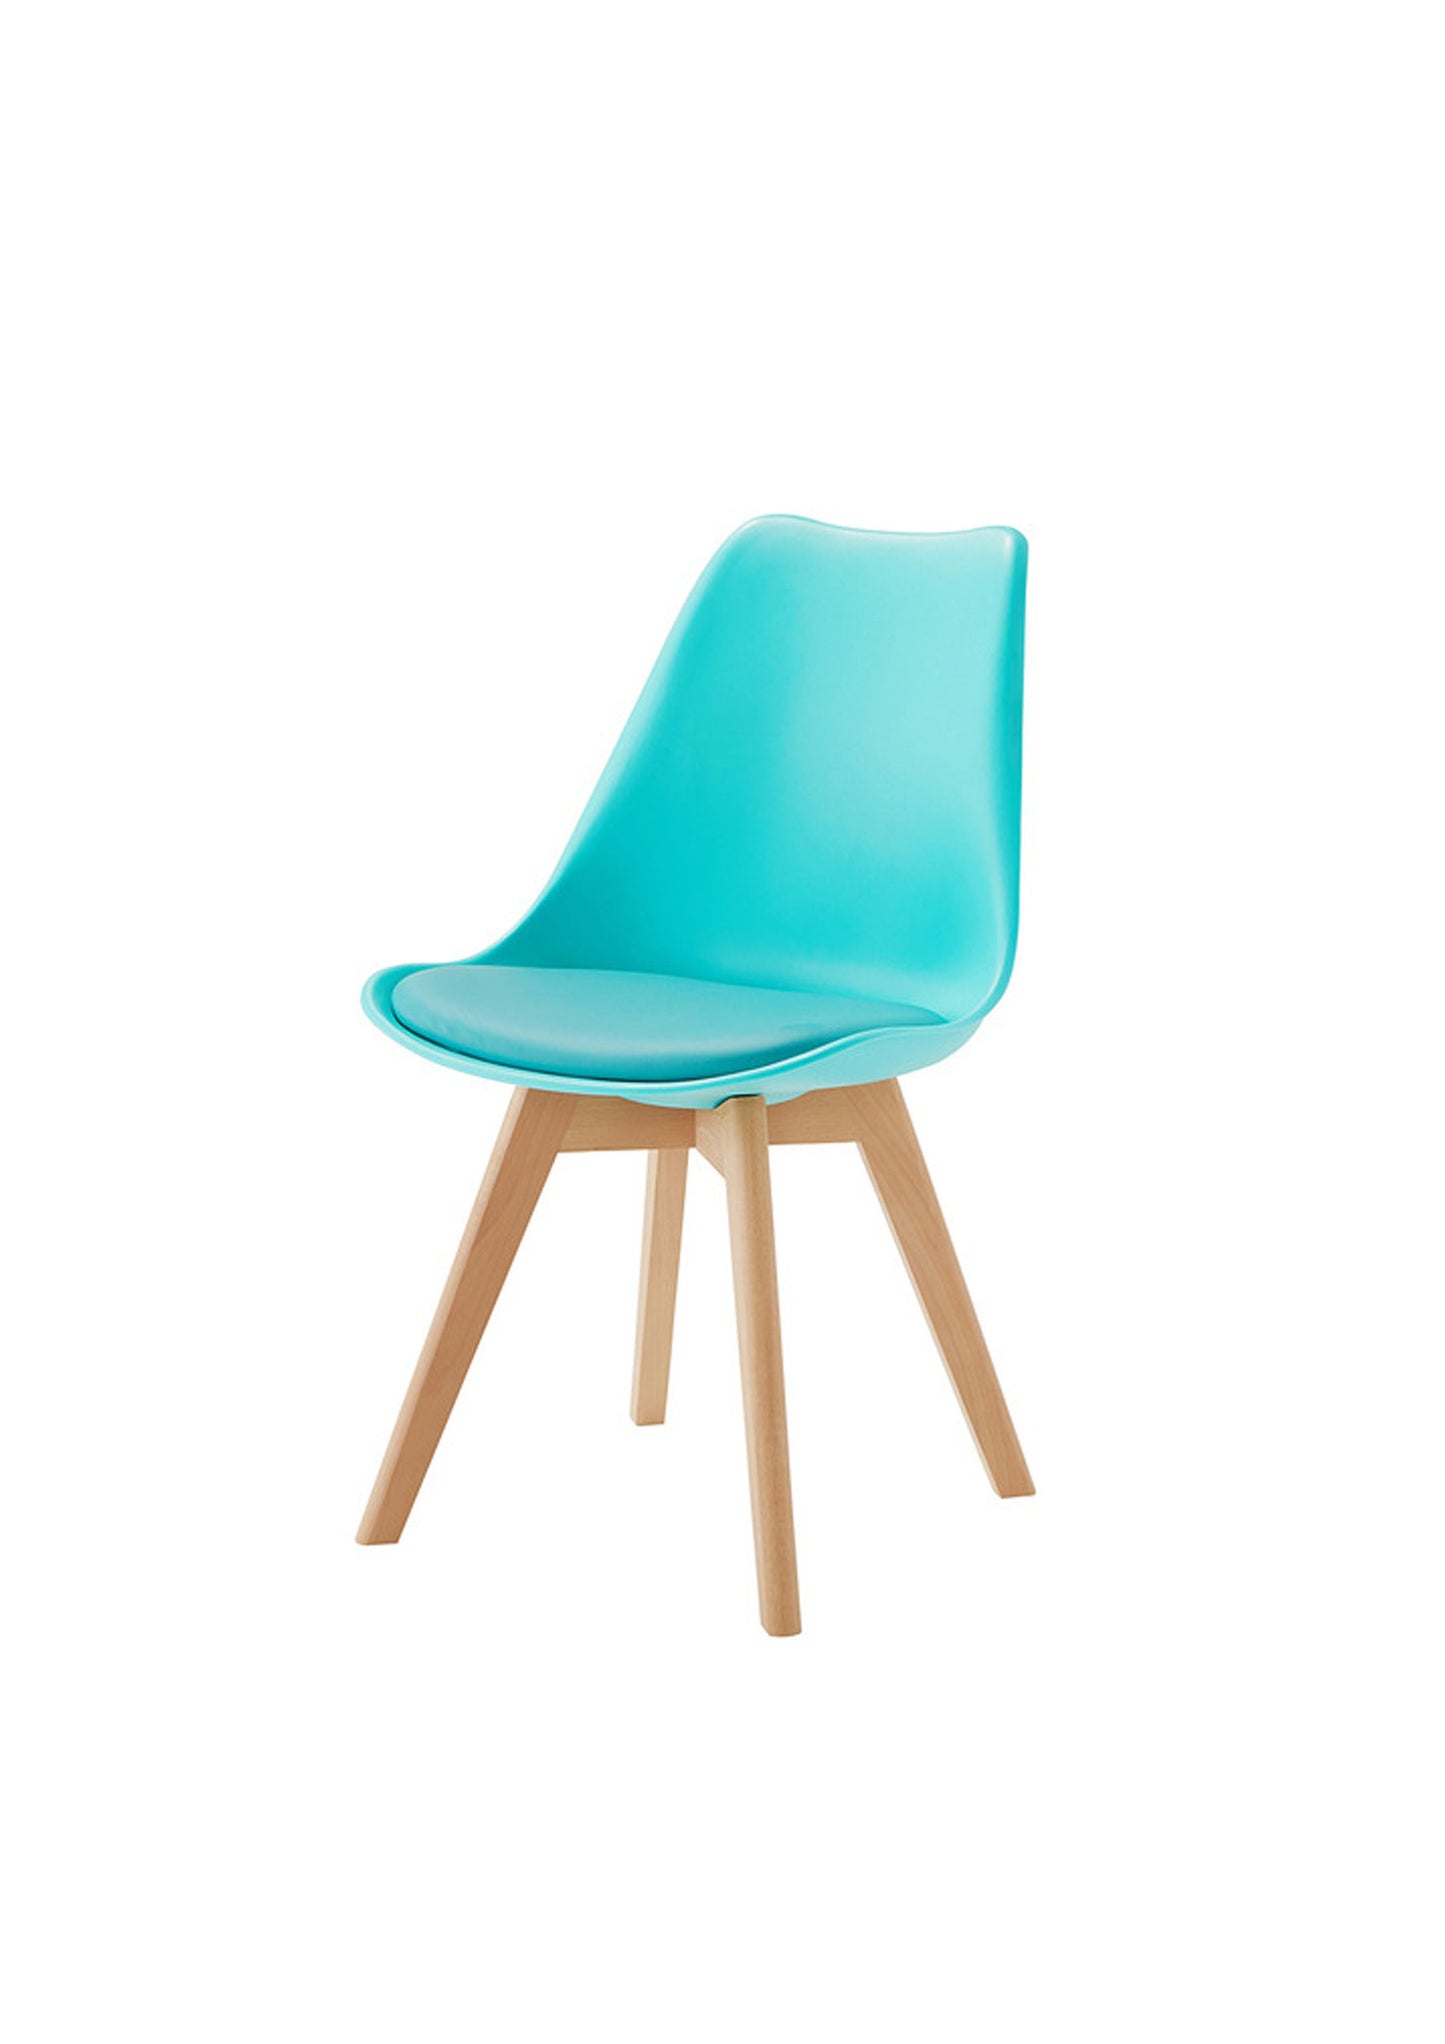 Stylish padded seat PAIR of dining chairs available in Pink, Blue, Aqua and Putty